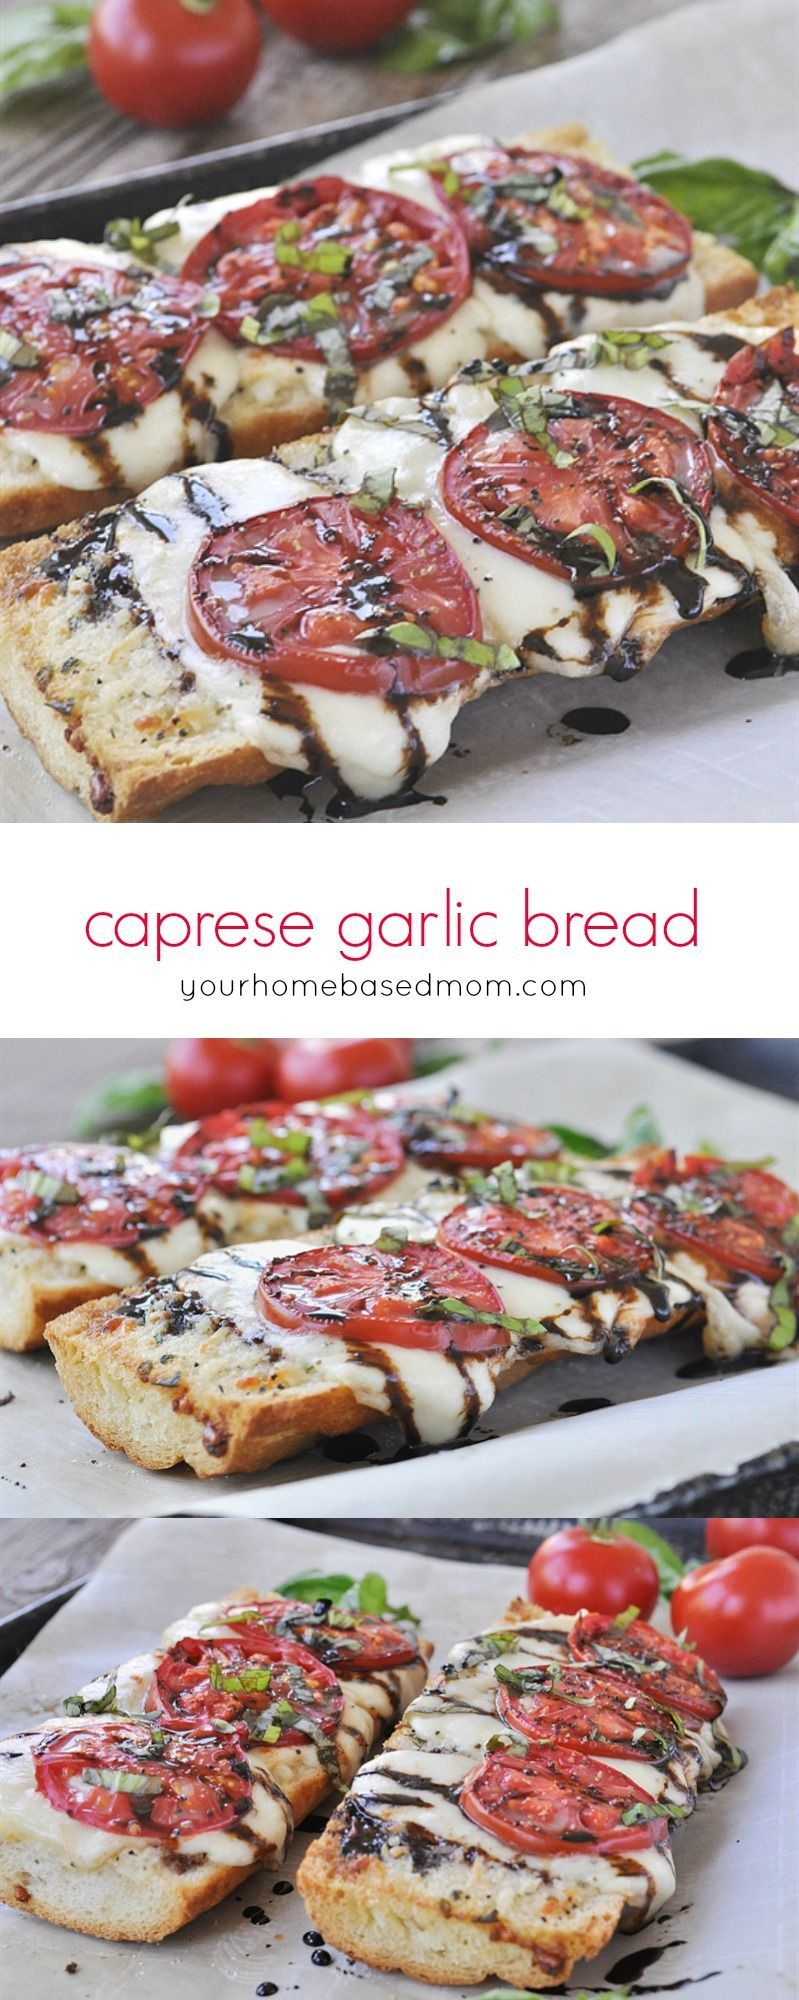 Caprese Garlic Bread ~ the perfect combination of two favorite dishes that makes for the perfect summer treat!